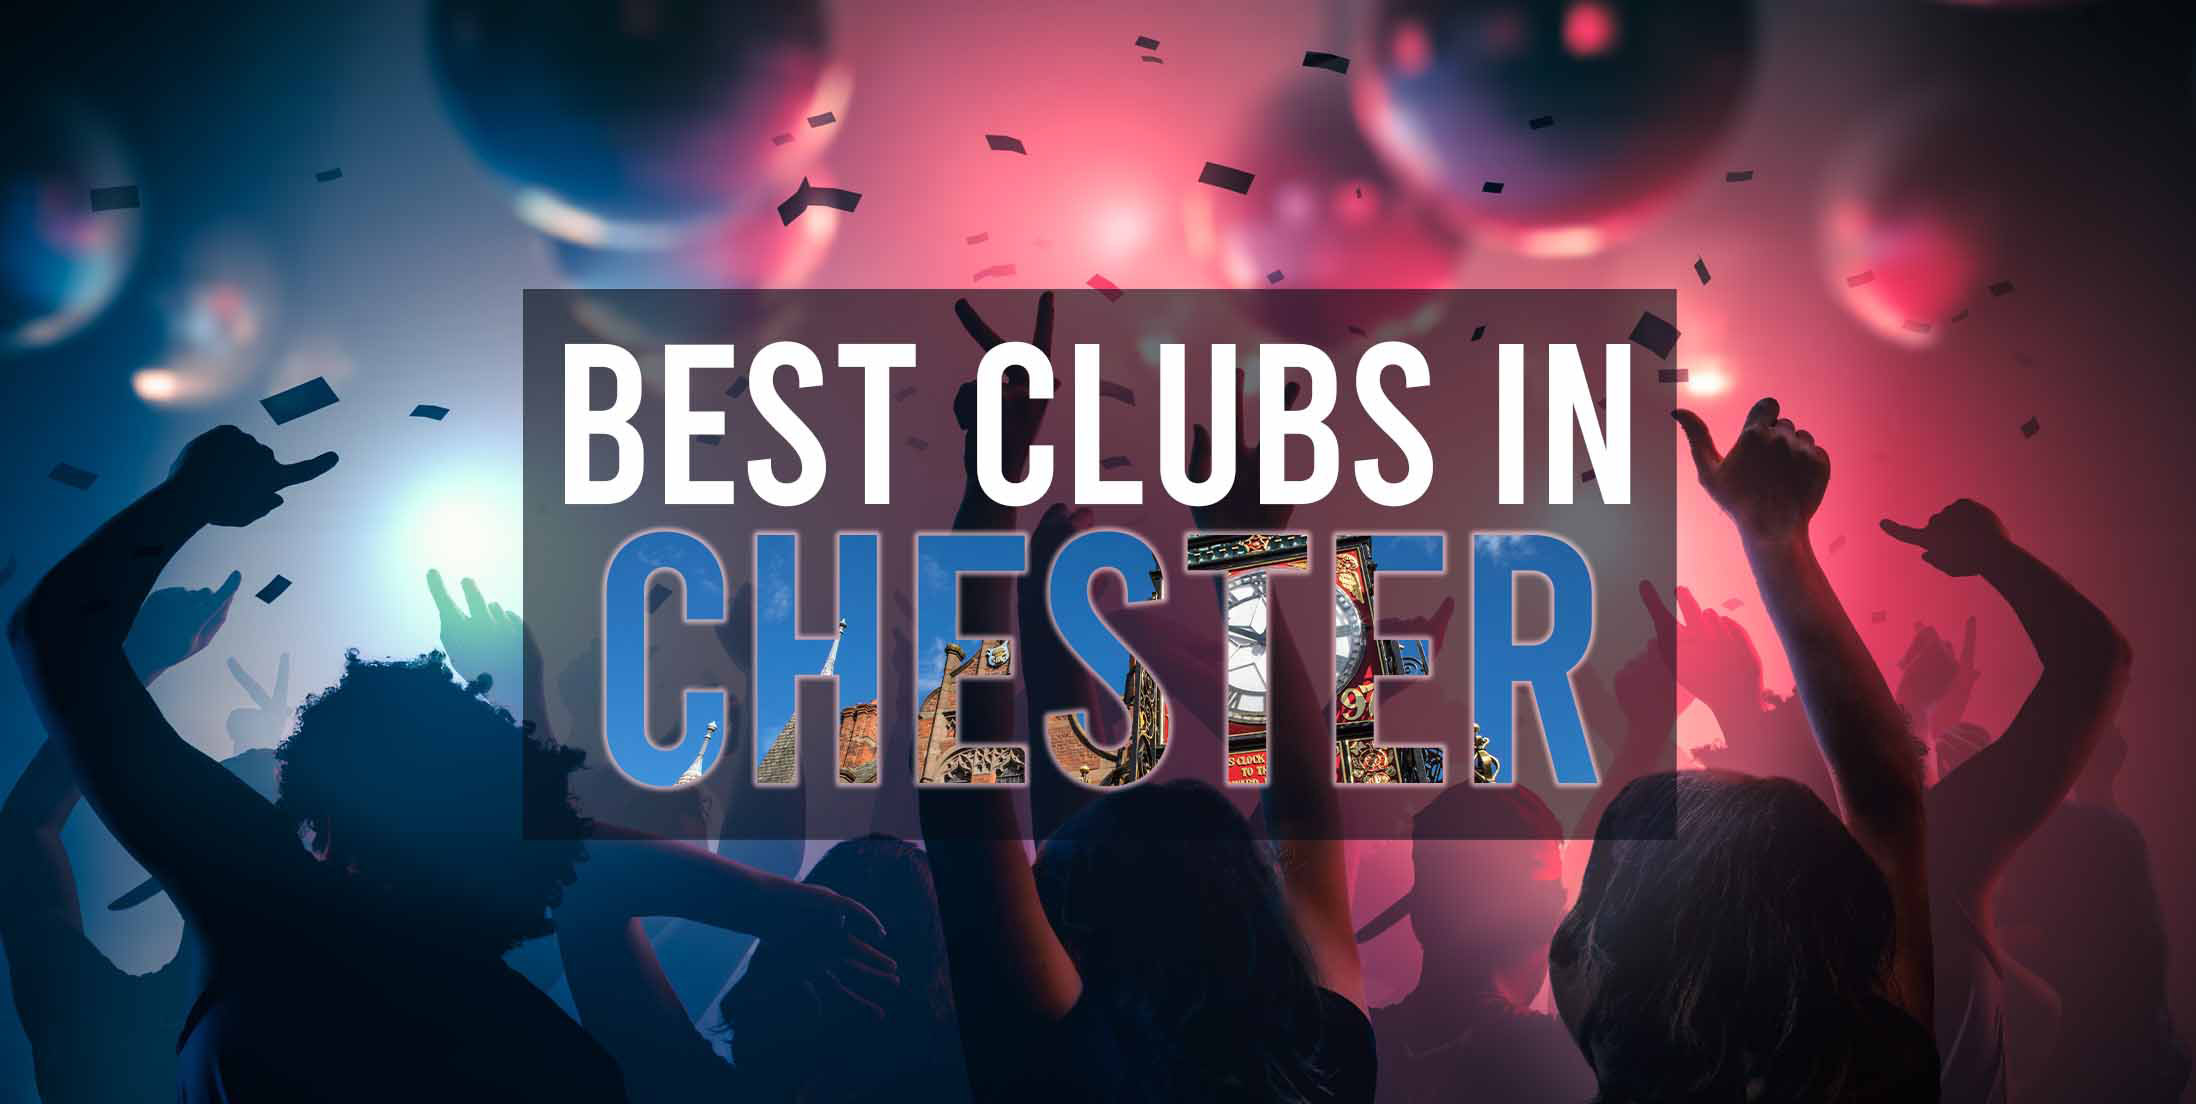 5 Best Clubs in Chester | Chester Nightclubs